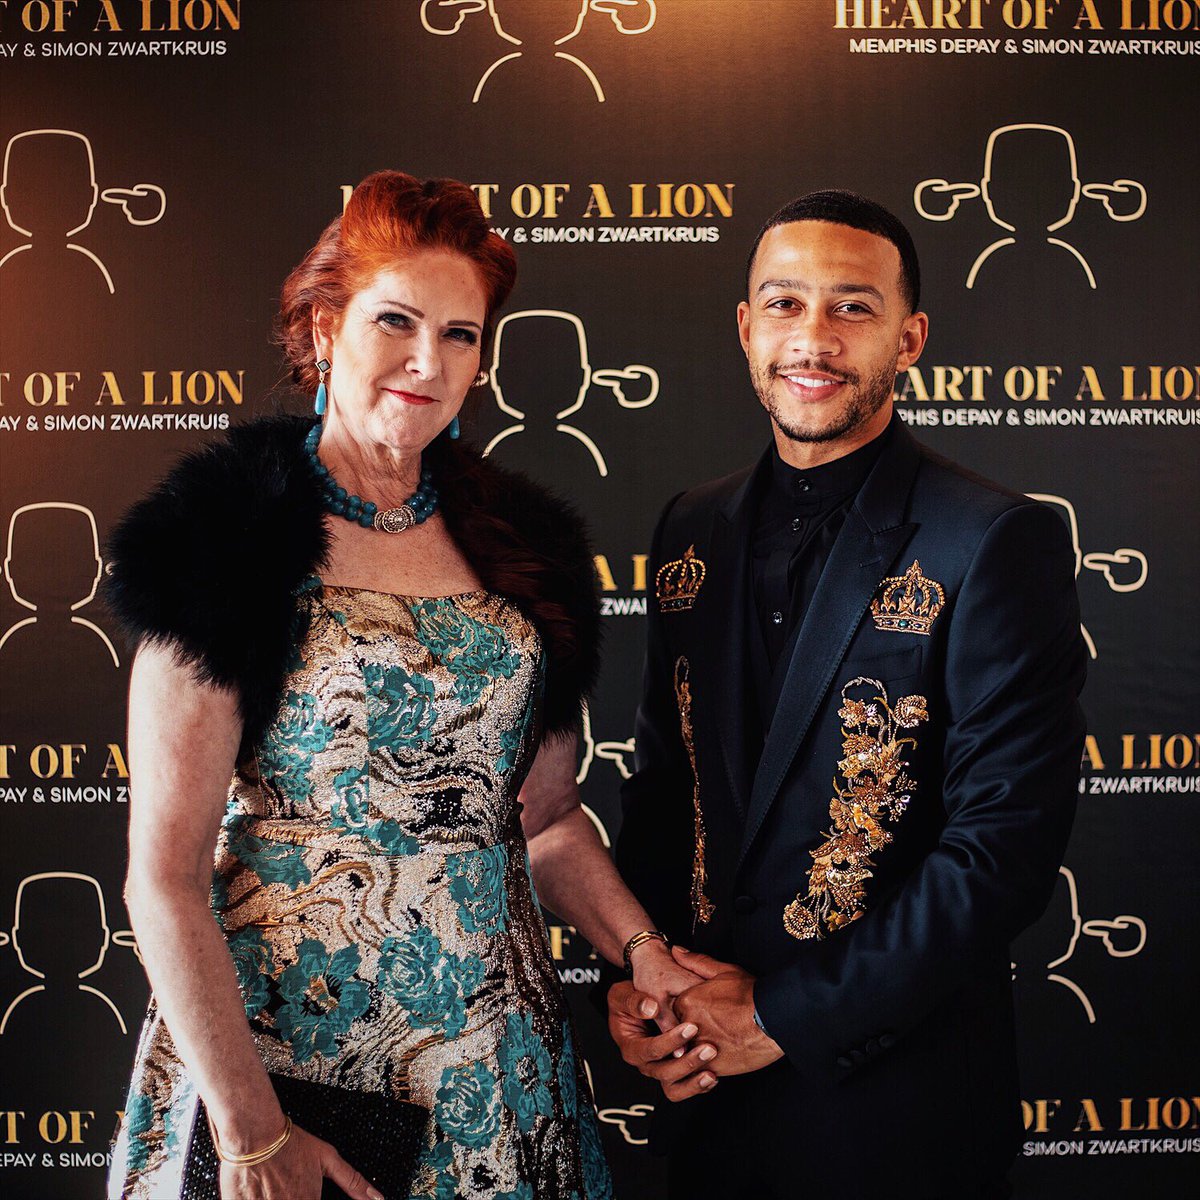 Memphis Depay on Twitter: "Me and my Mom at the 'Heart Of A Lion' book  launch on Tuesday. If you read my book you'll see why she's such an  inspiration to me